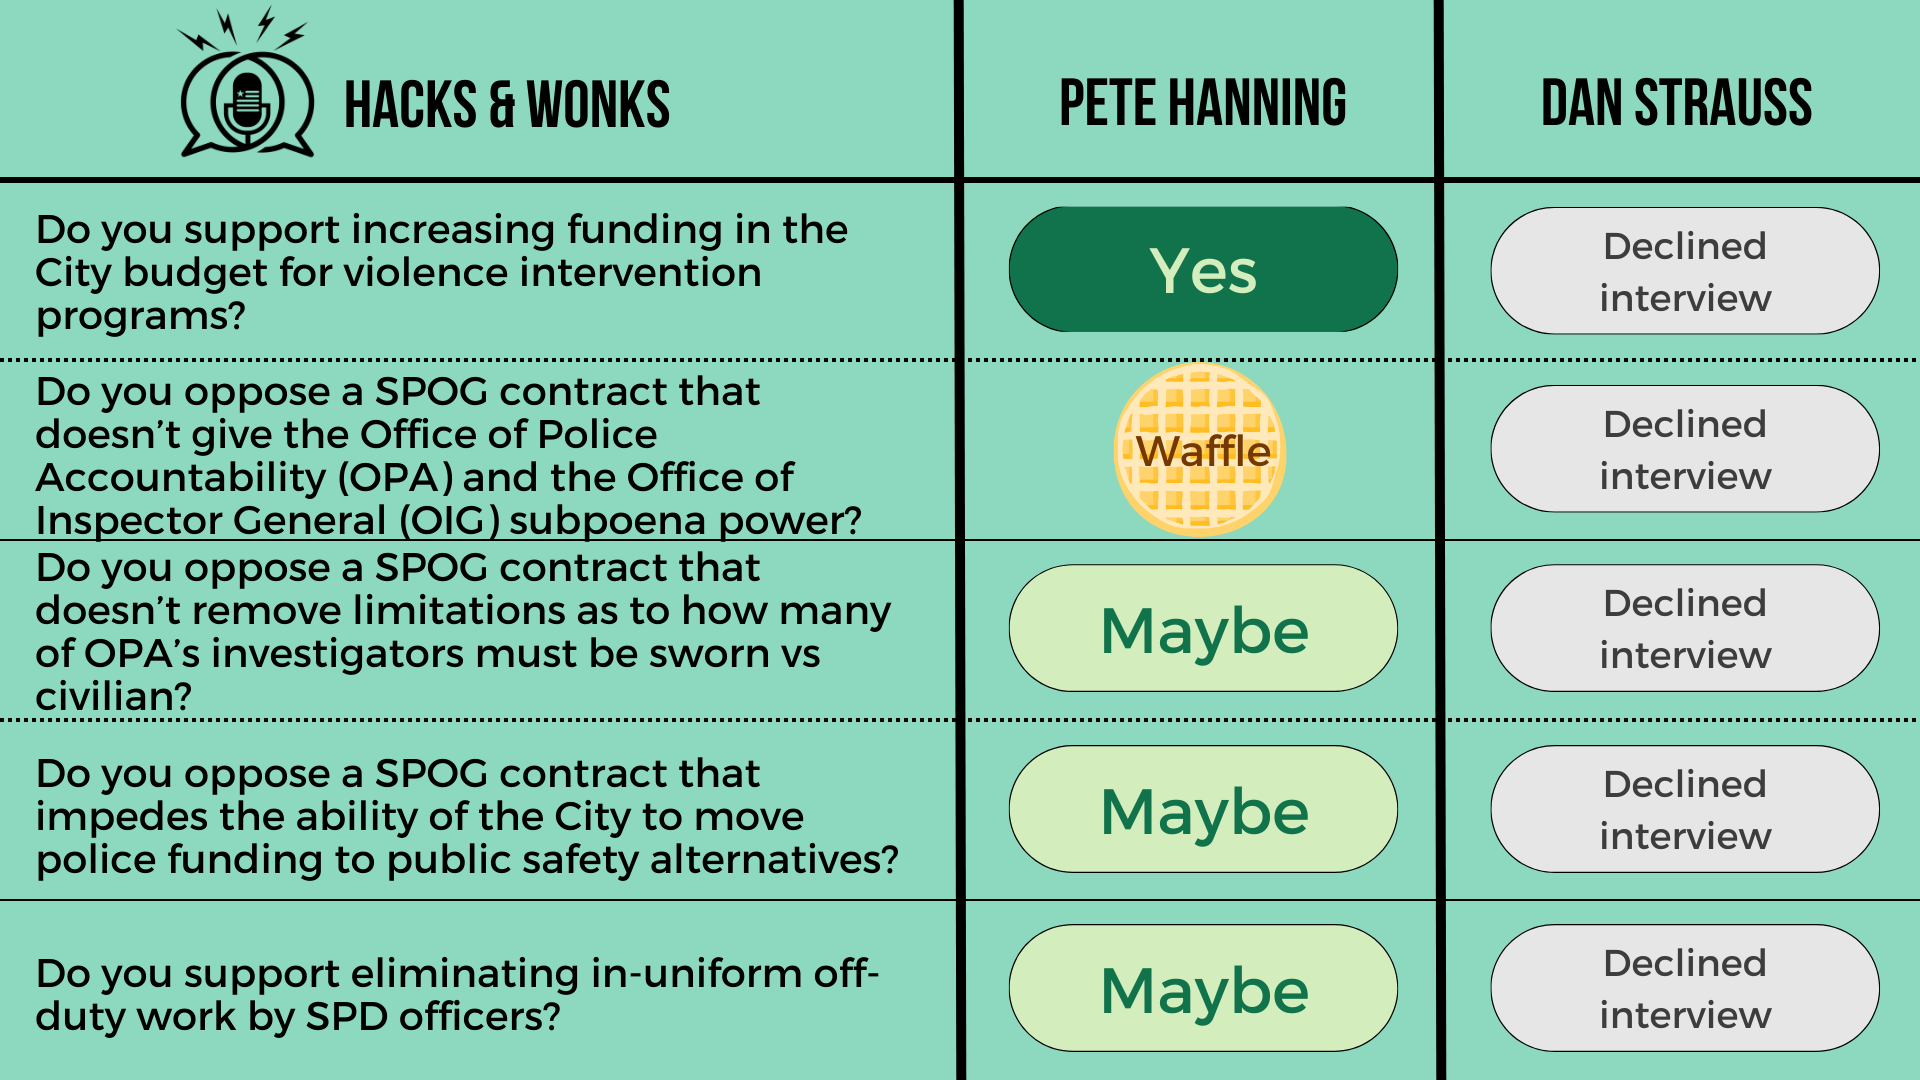 Q: Do you support increasing funding in the City budget for violence intervention programs? Pete Hanning: Yes, Dan Strauss: Declined interview  Q: Do you oppose a SPOG contract that doesn’t give the Office of Police Accountability (OPA) and the Offic